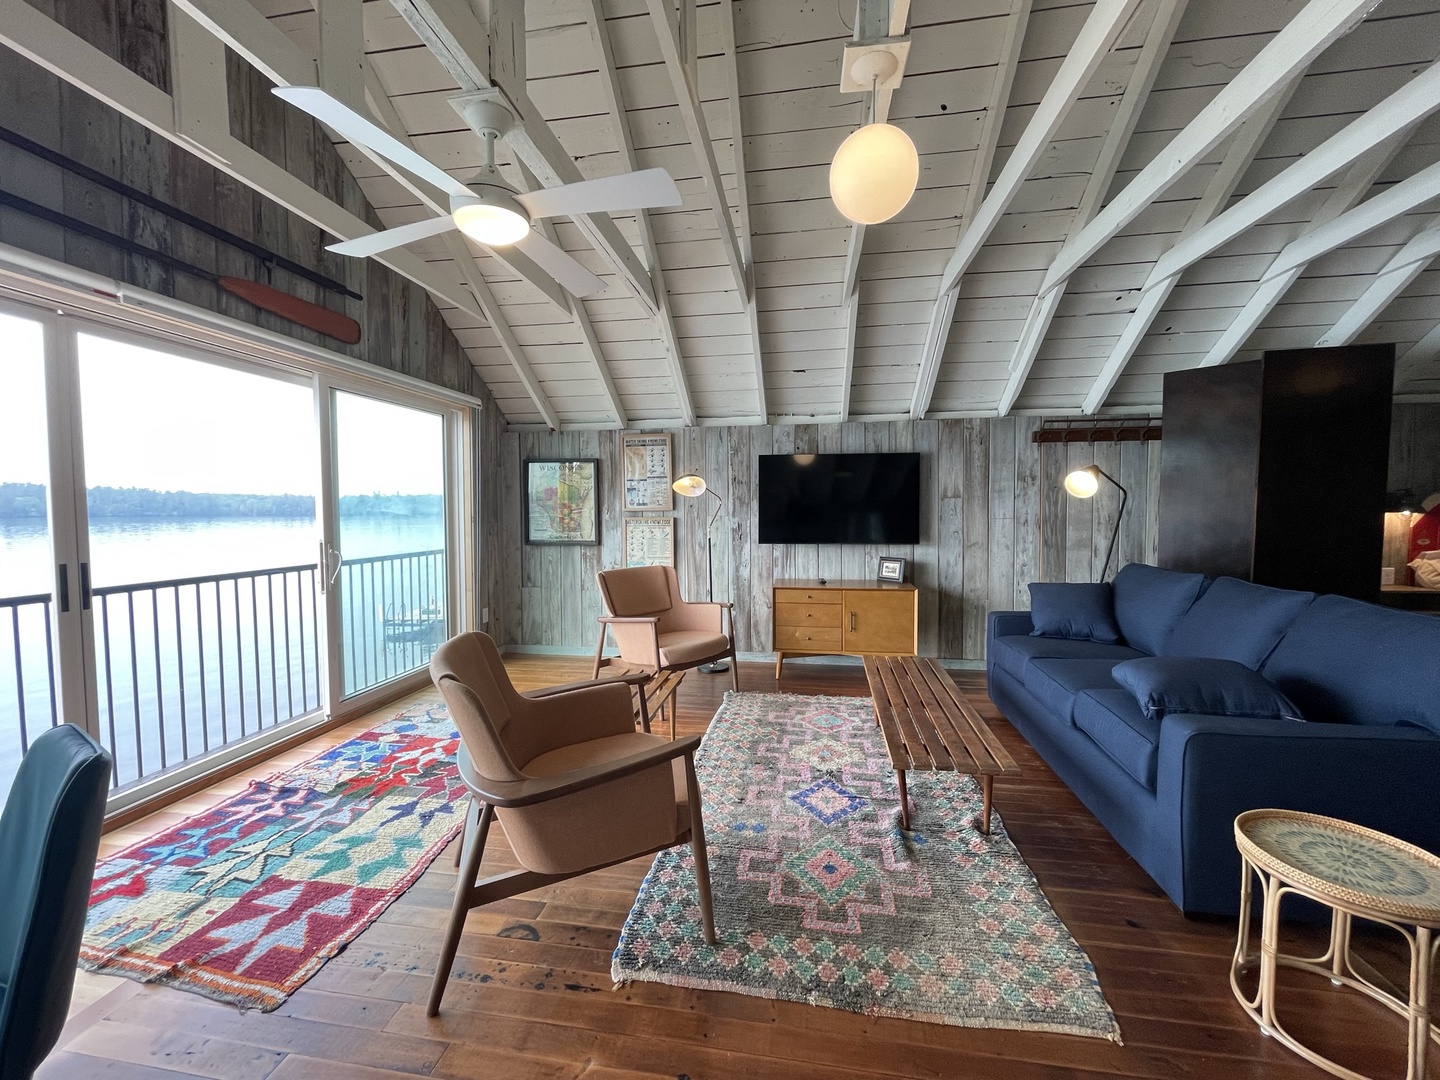 The Boat House - Hiller Vacation Homes